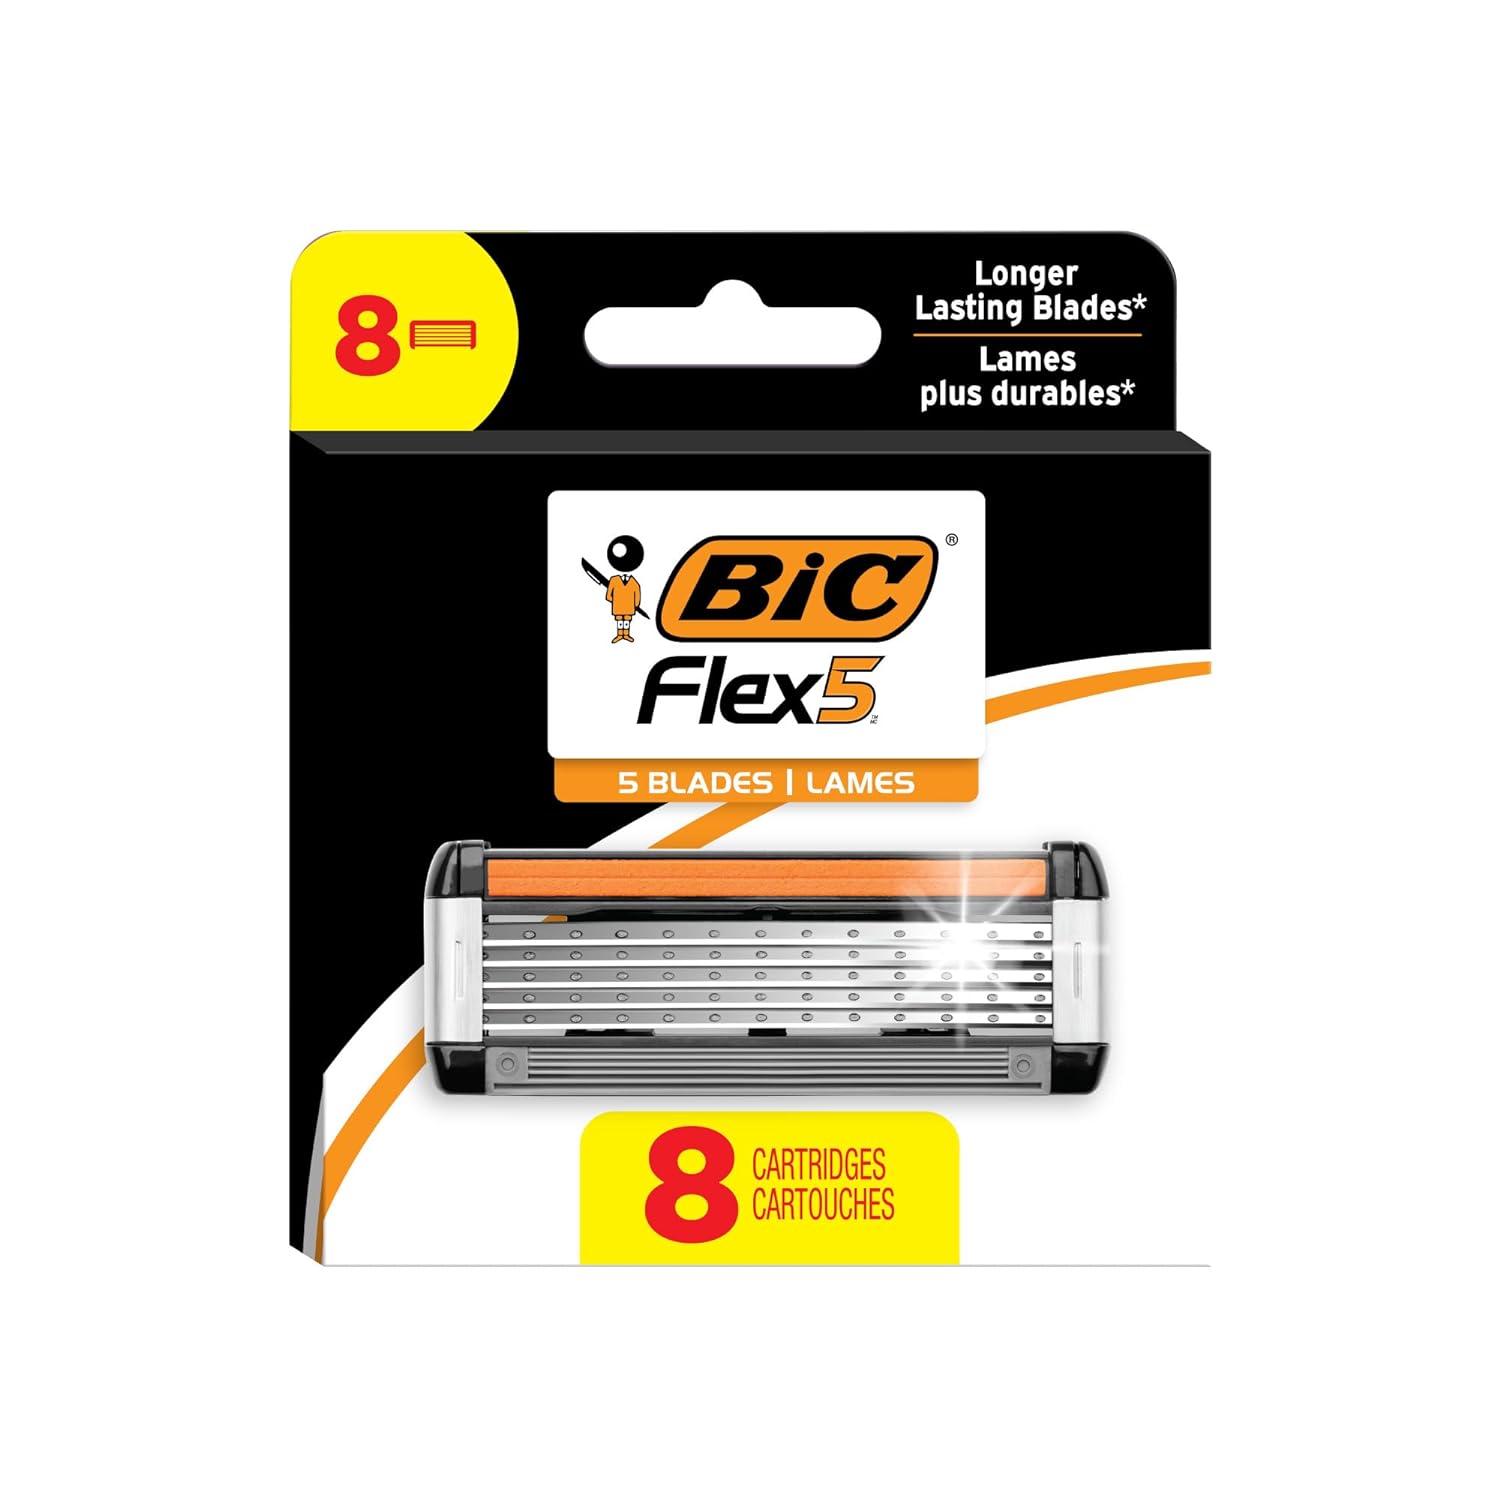 BIC Flex 5 Refillable Refill Razor Cartridges for Men, Long-Blade Razors for a Smooth and Comfortable Shave, 8 Refill Cartridges